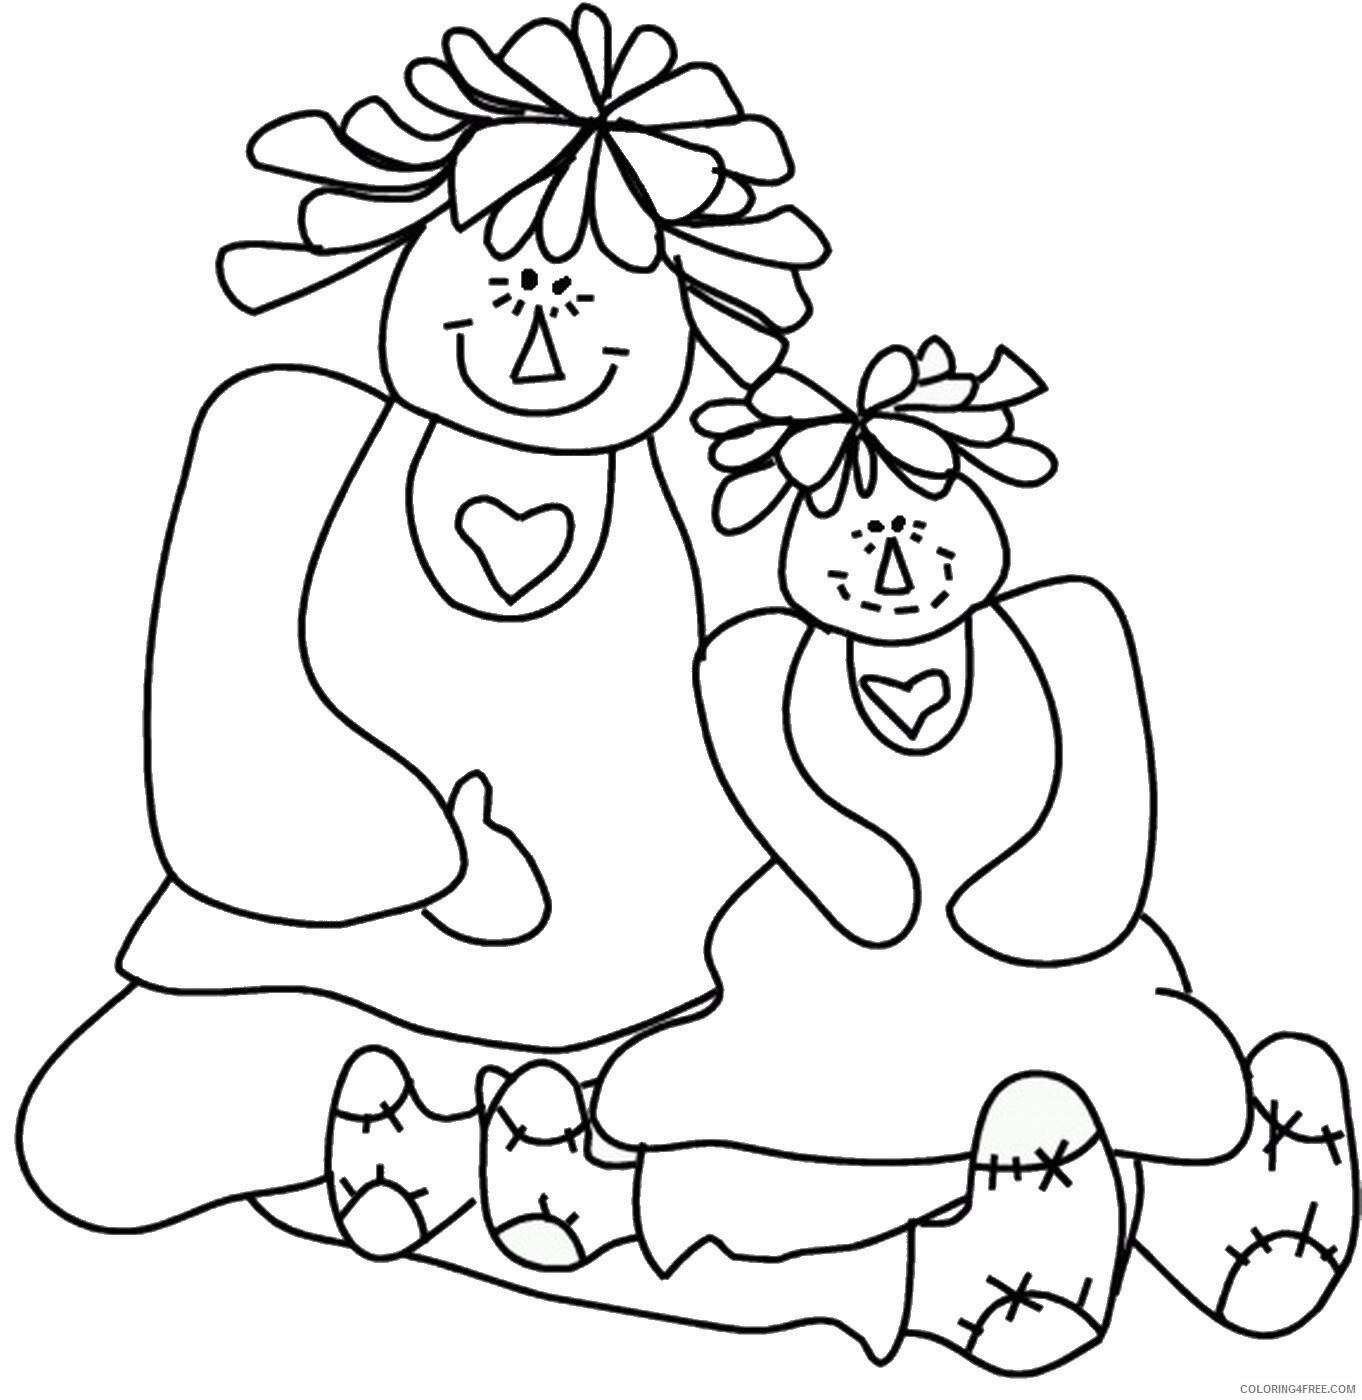 Doll Coloring Pages for Girls dolls_29 Printable 2021 0380 Coloring4free